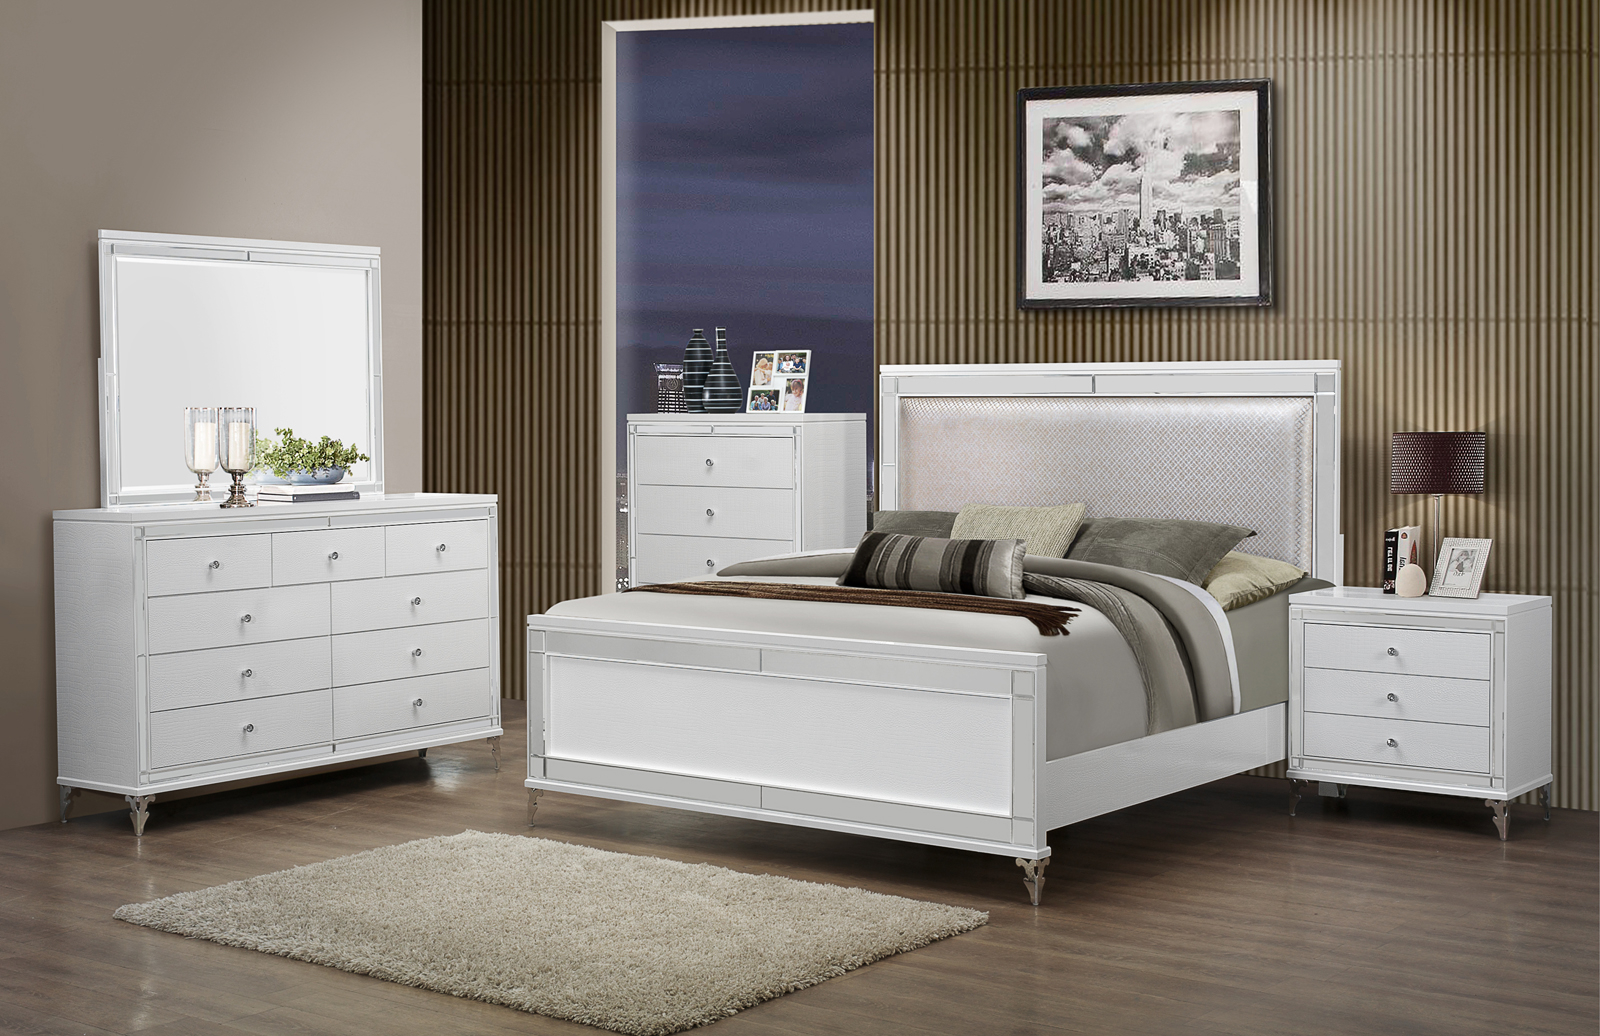 Global Furniture Catalina 4 Piece Panel Bedroom Set In Metallic White inside dimensions 1600 X 1036